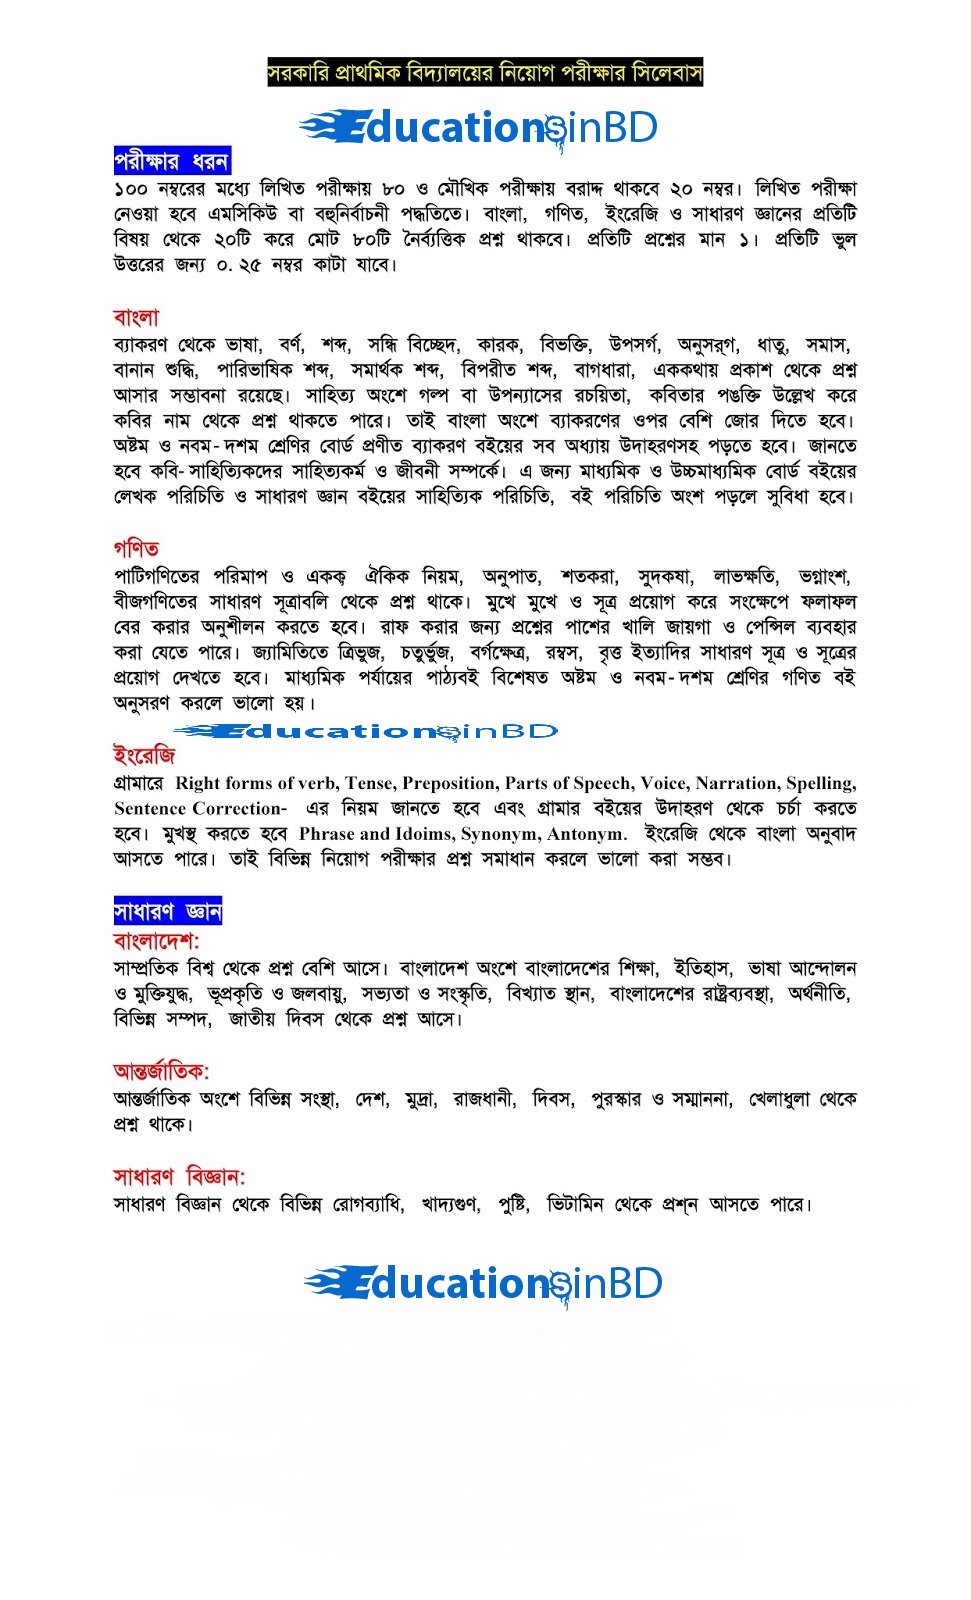 Primary School Assistant Teacher Exam Syllabus And Mark Distribution 2020